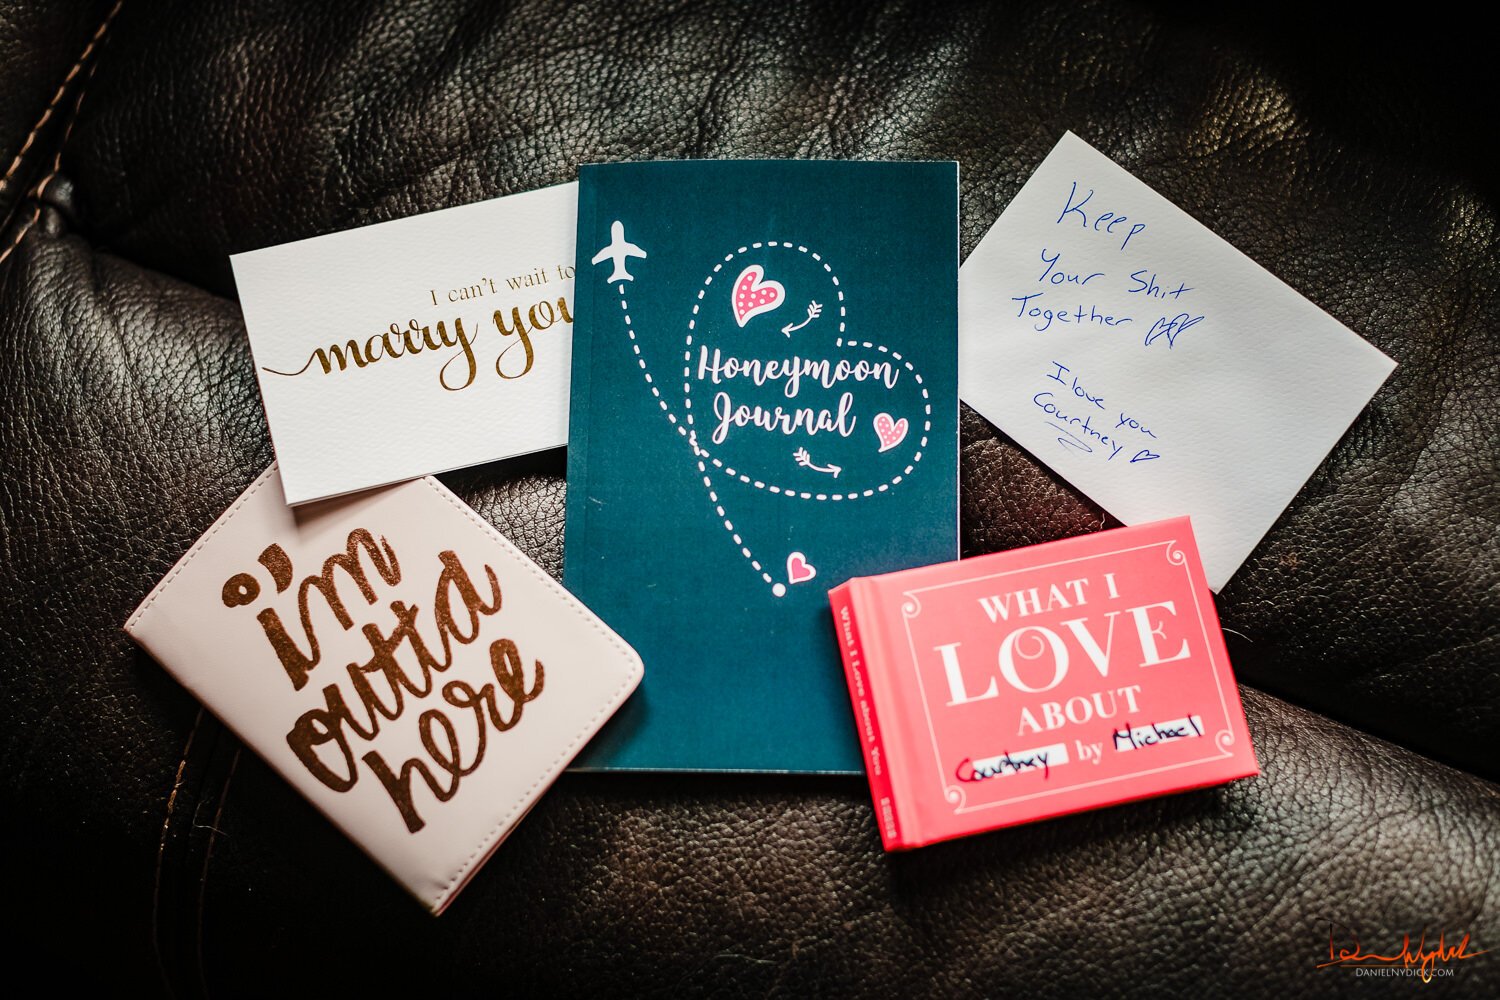 gifts and cards from groom to bride nj wedding